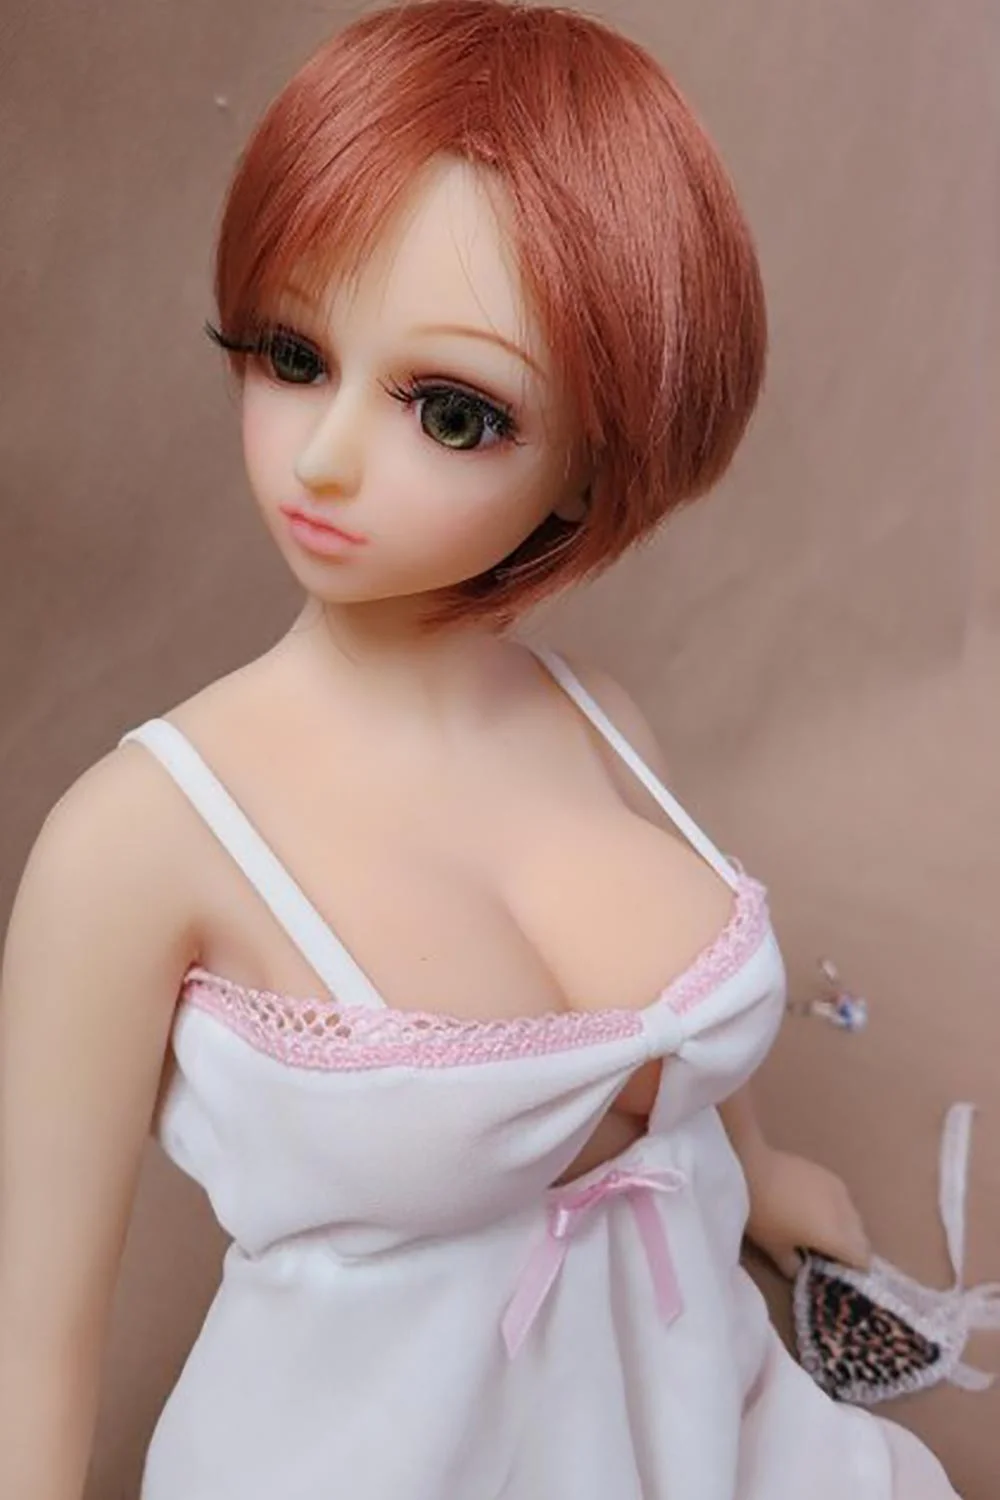 Mini sex doll with short brown hair and big eyes